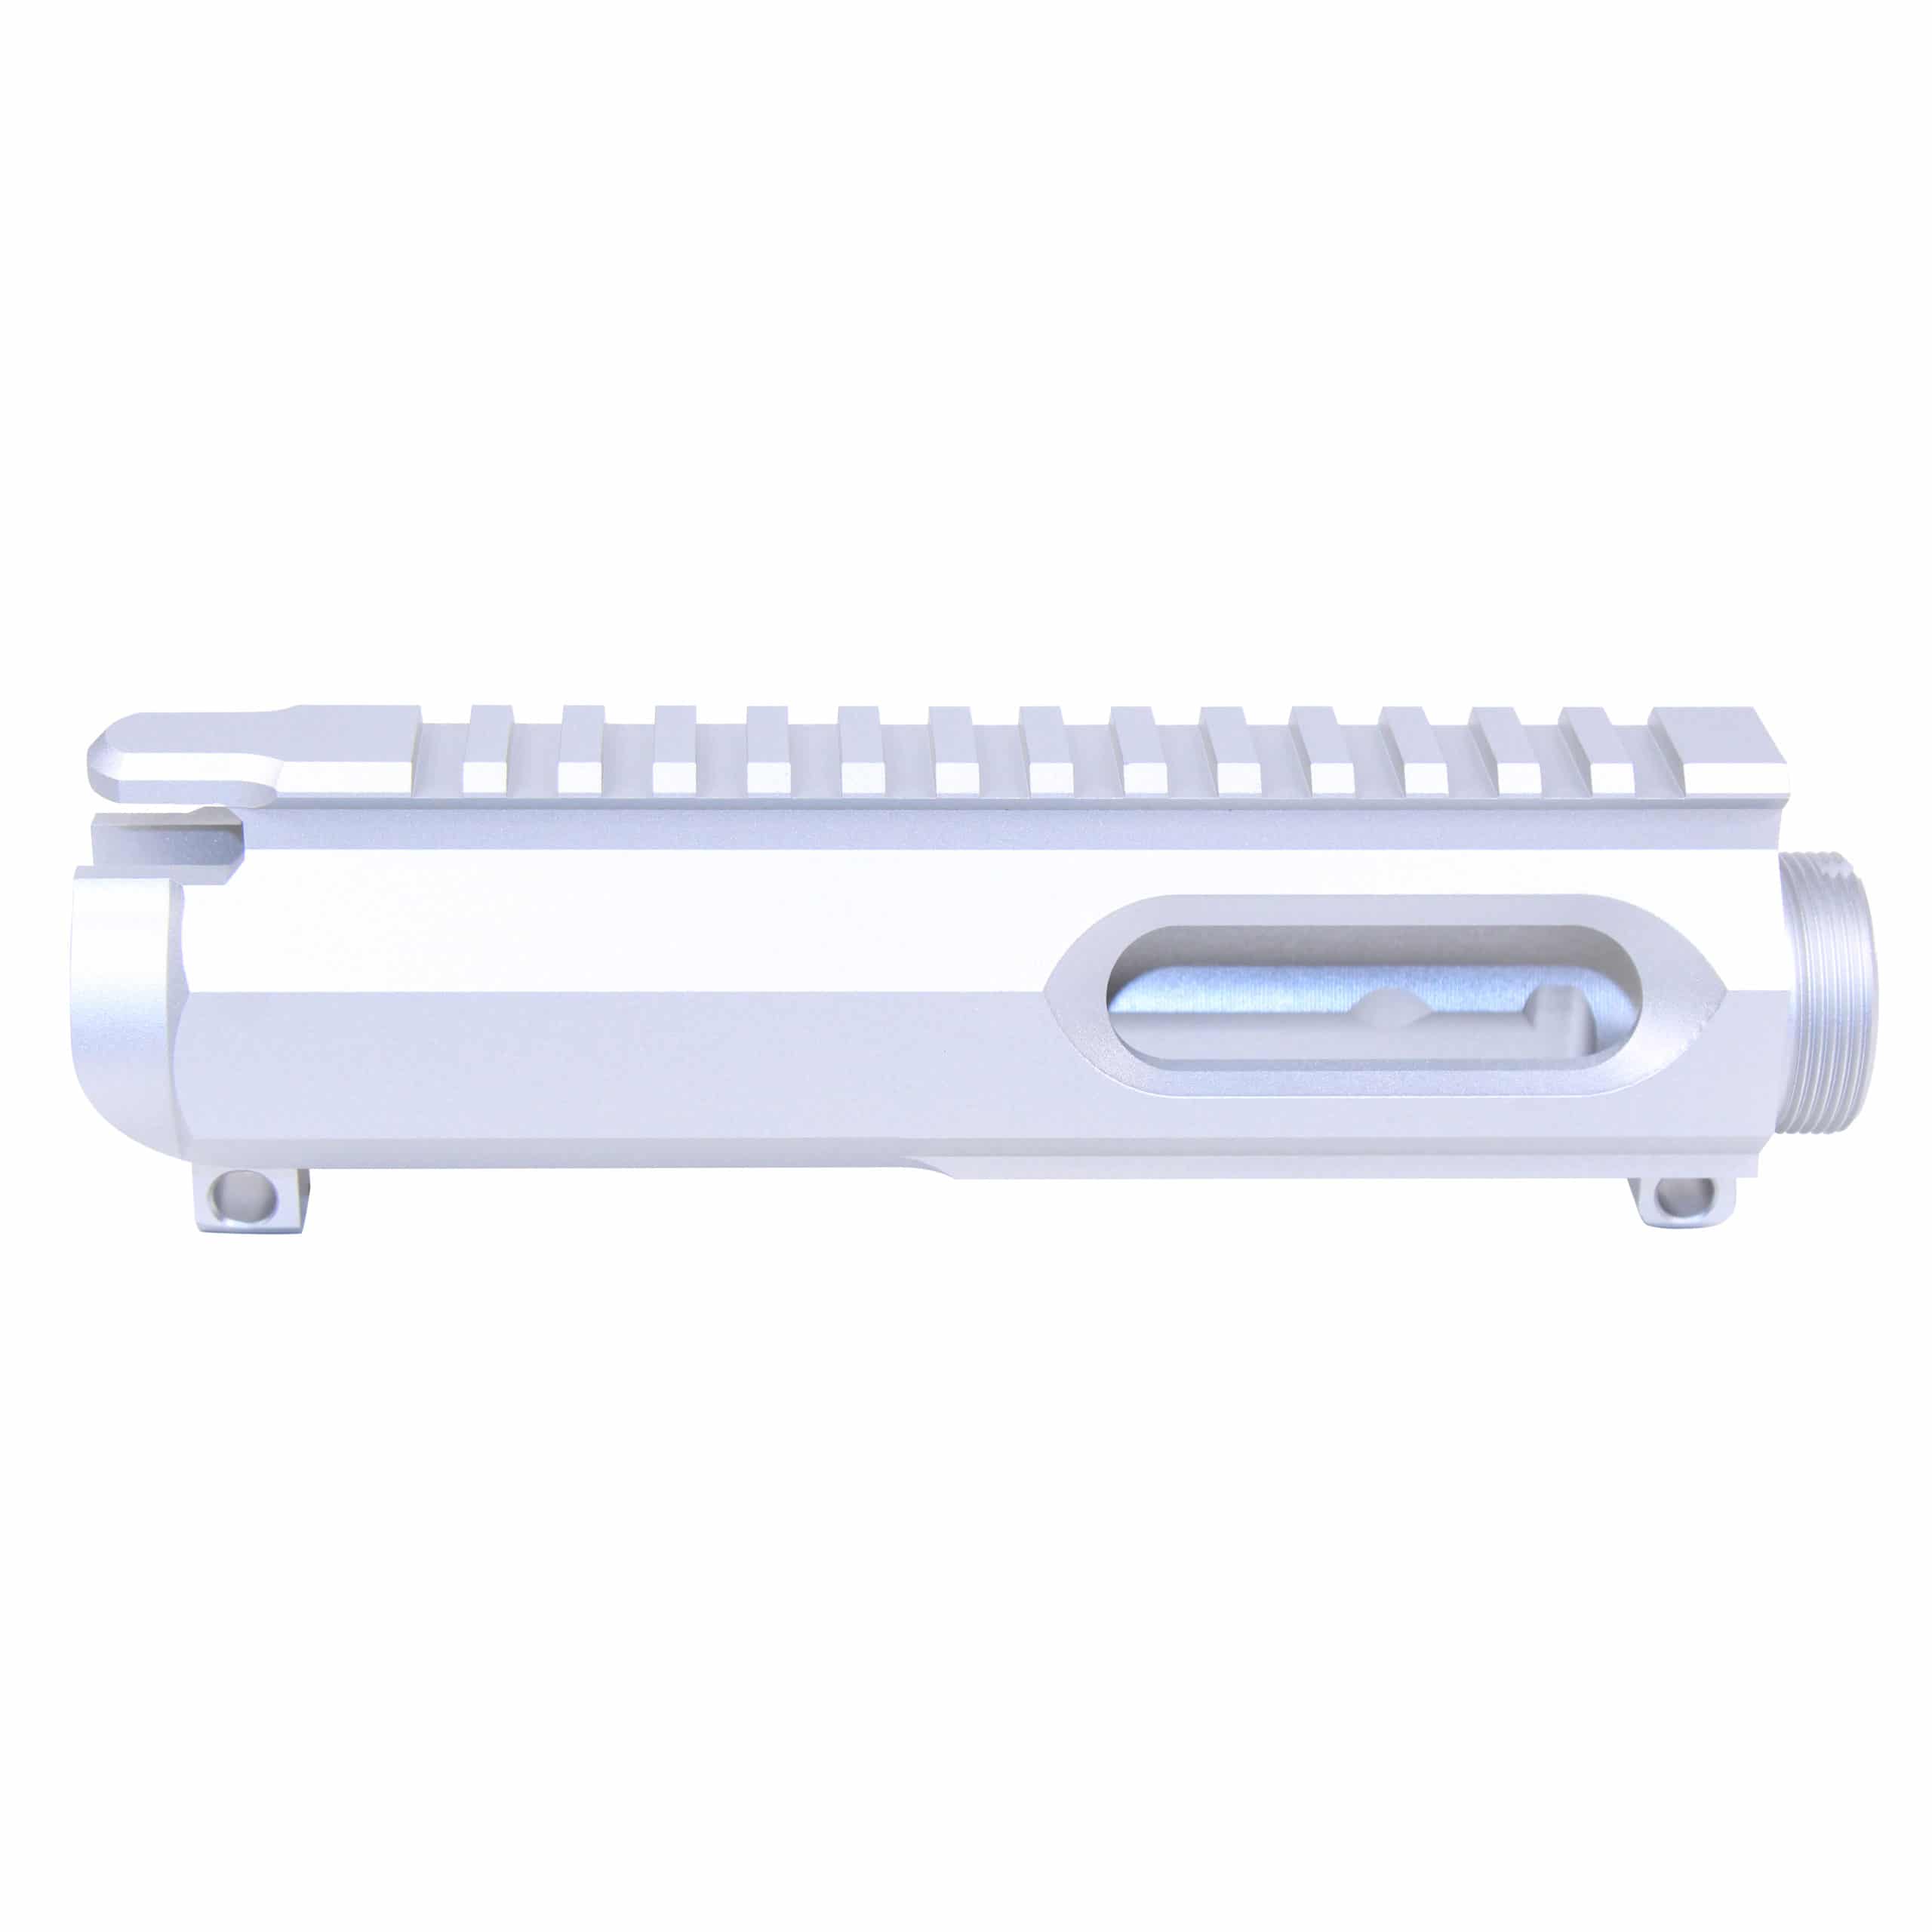 AR-15 9mm Dedicated Stripped Billet Upper Receiver (Anodized Clear)